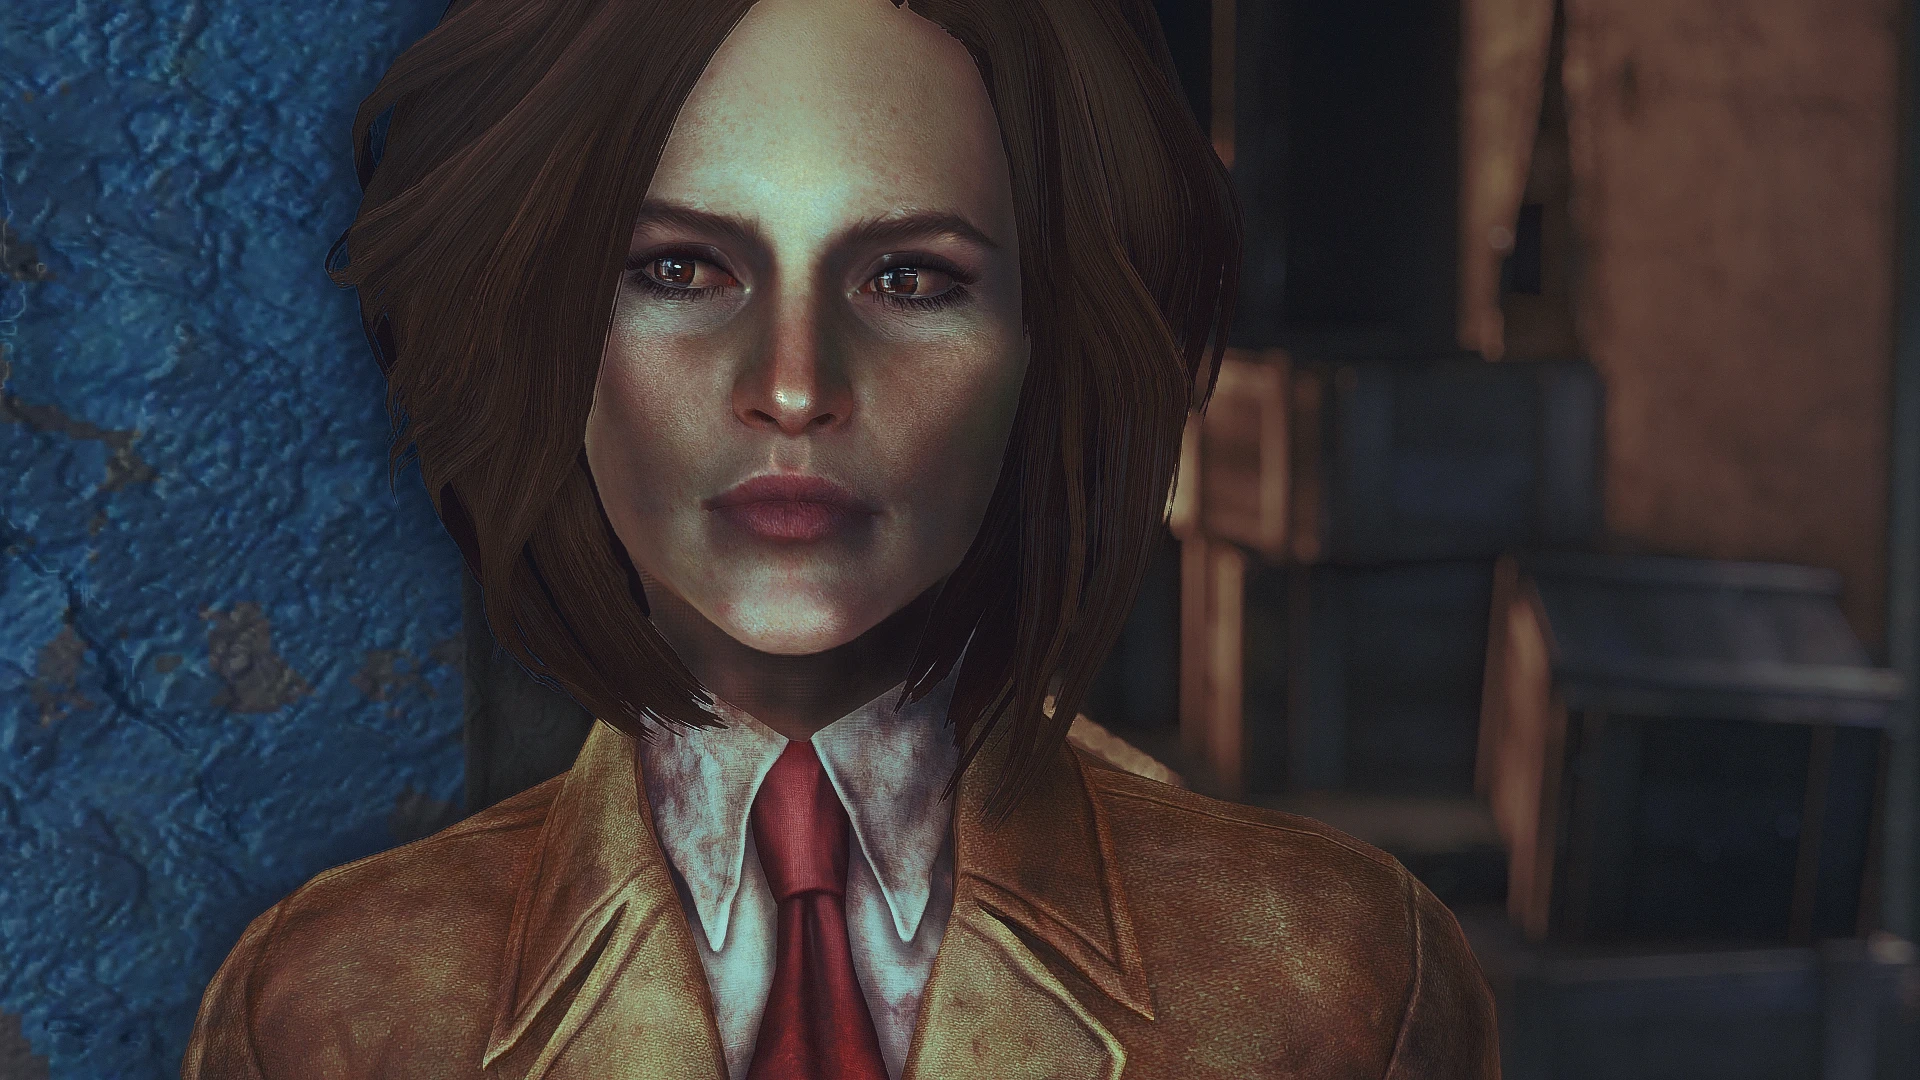 Real hd face textures 2k fallout 4 фото 61